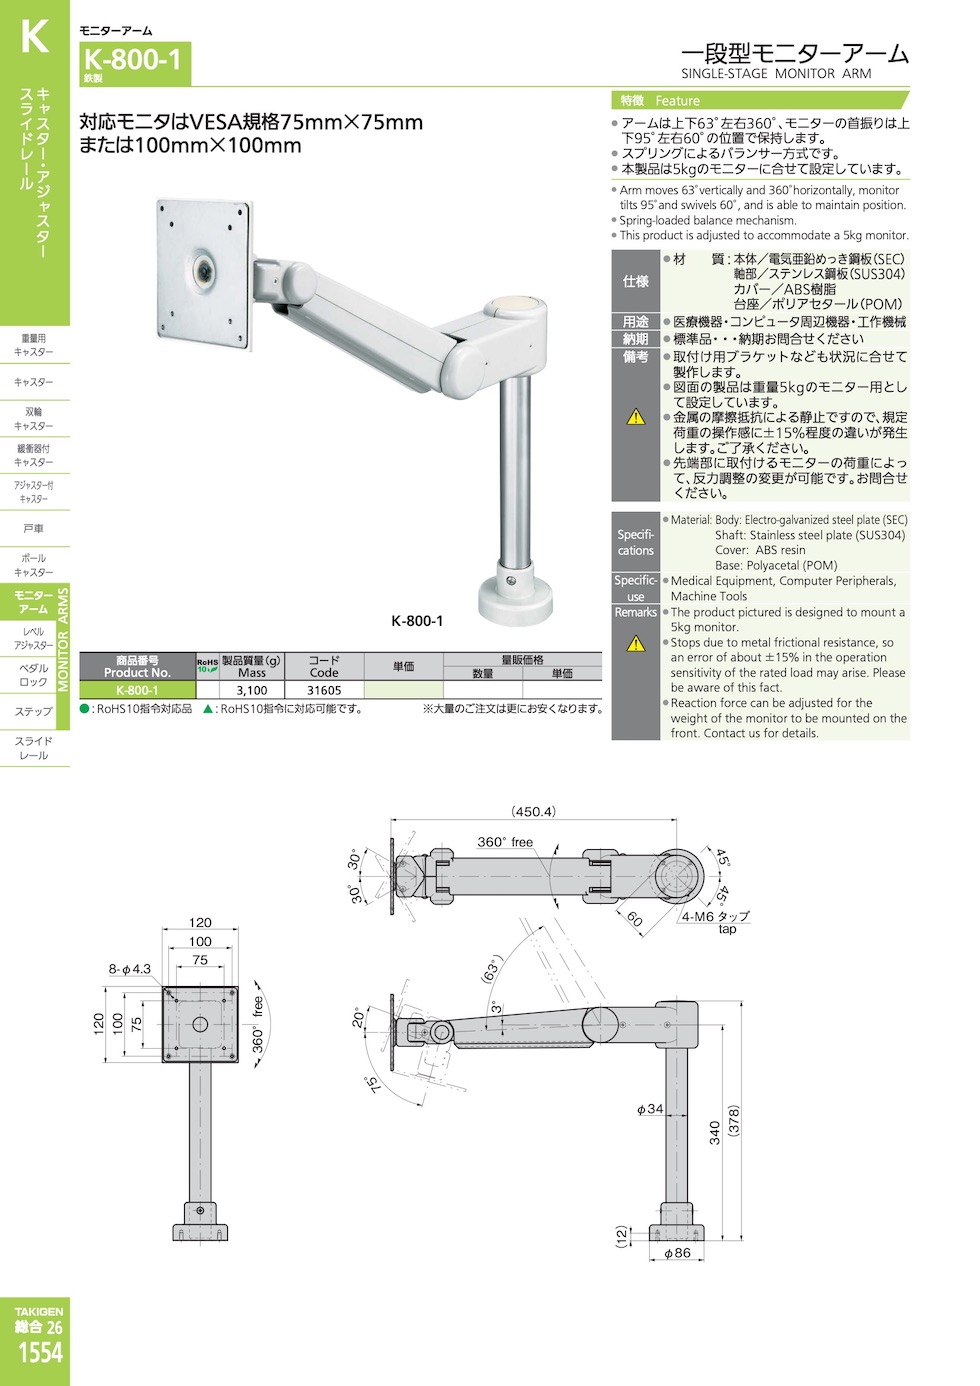 SINGLE-STAGE MONITOR ARM